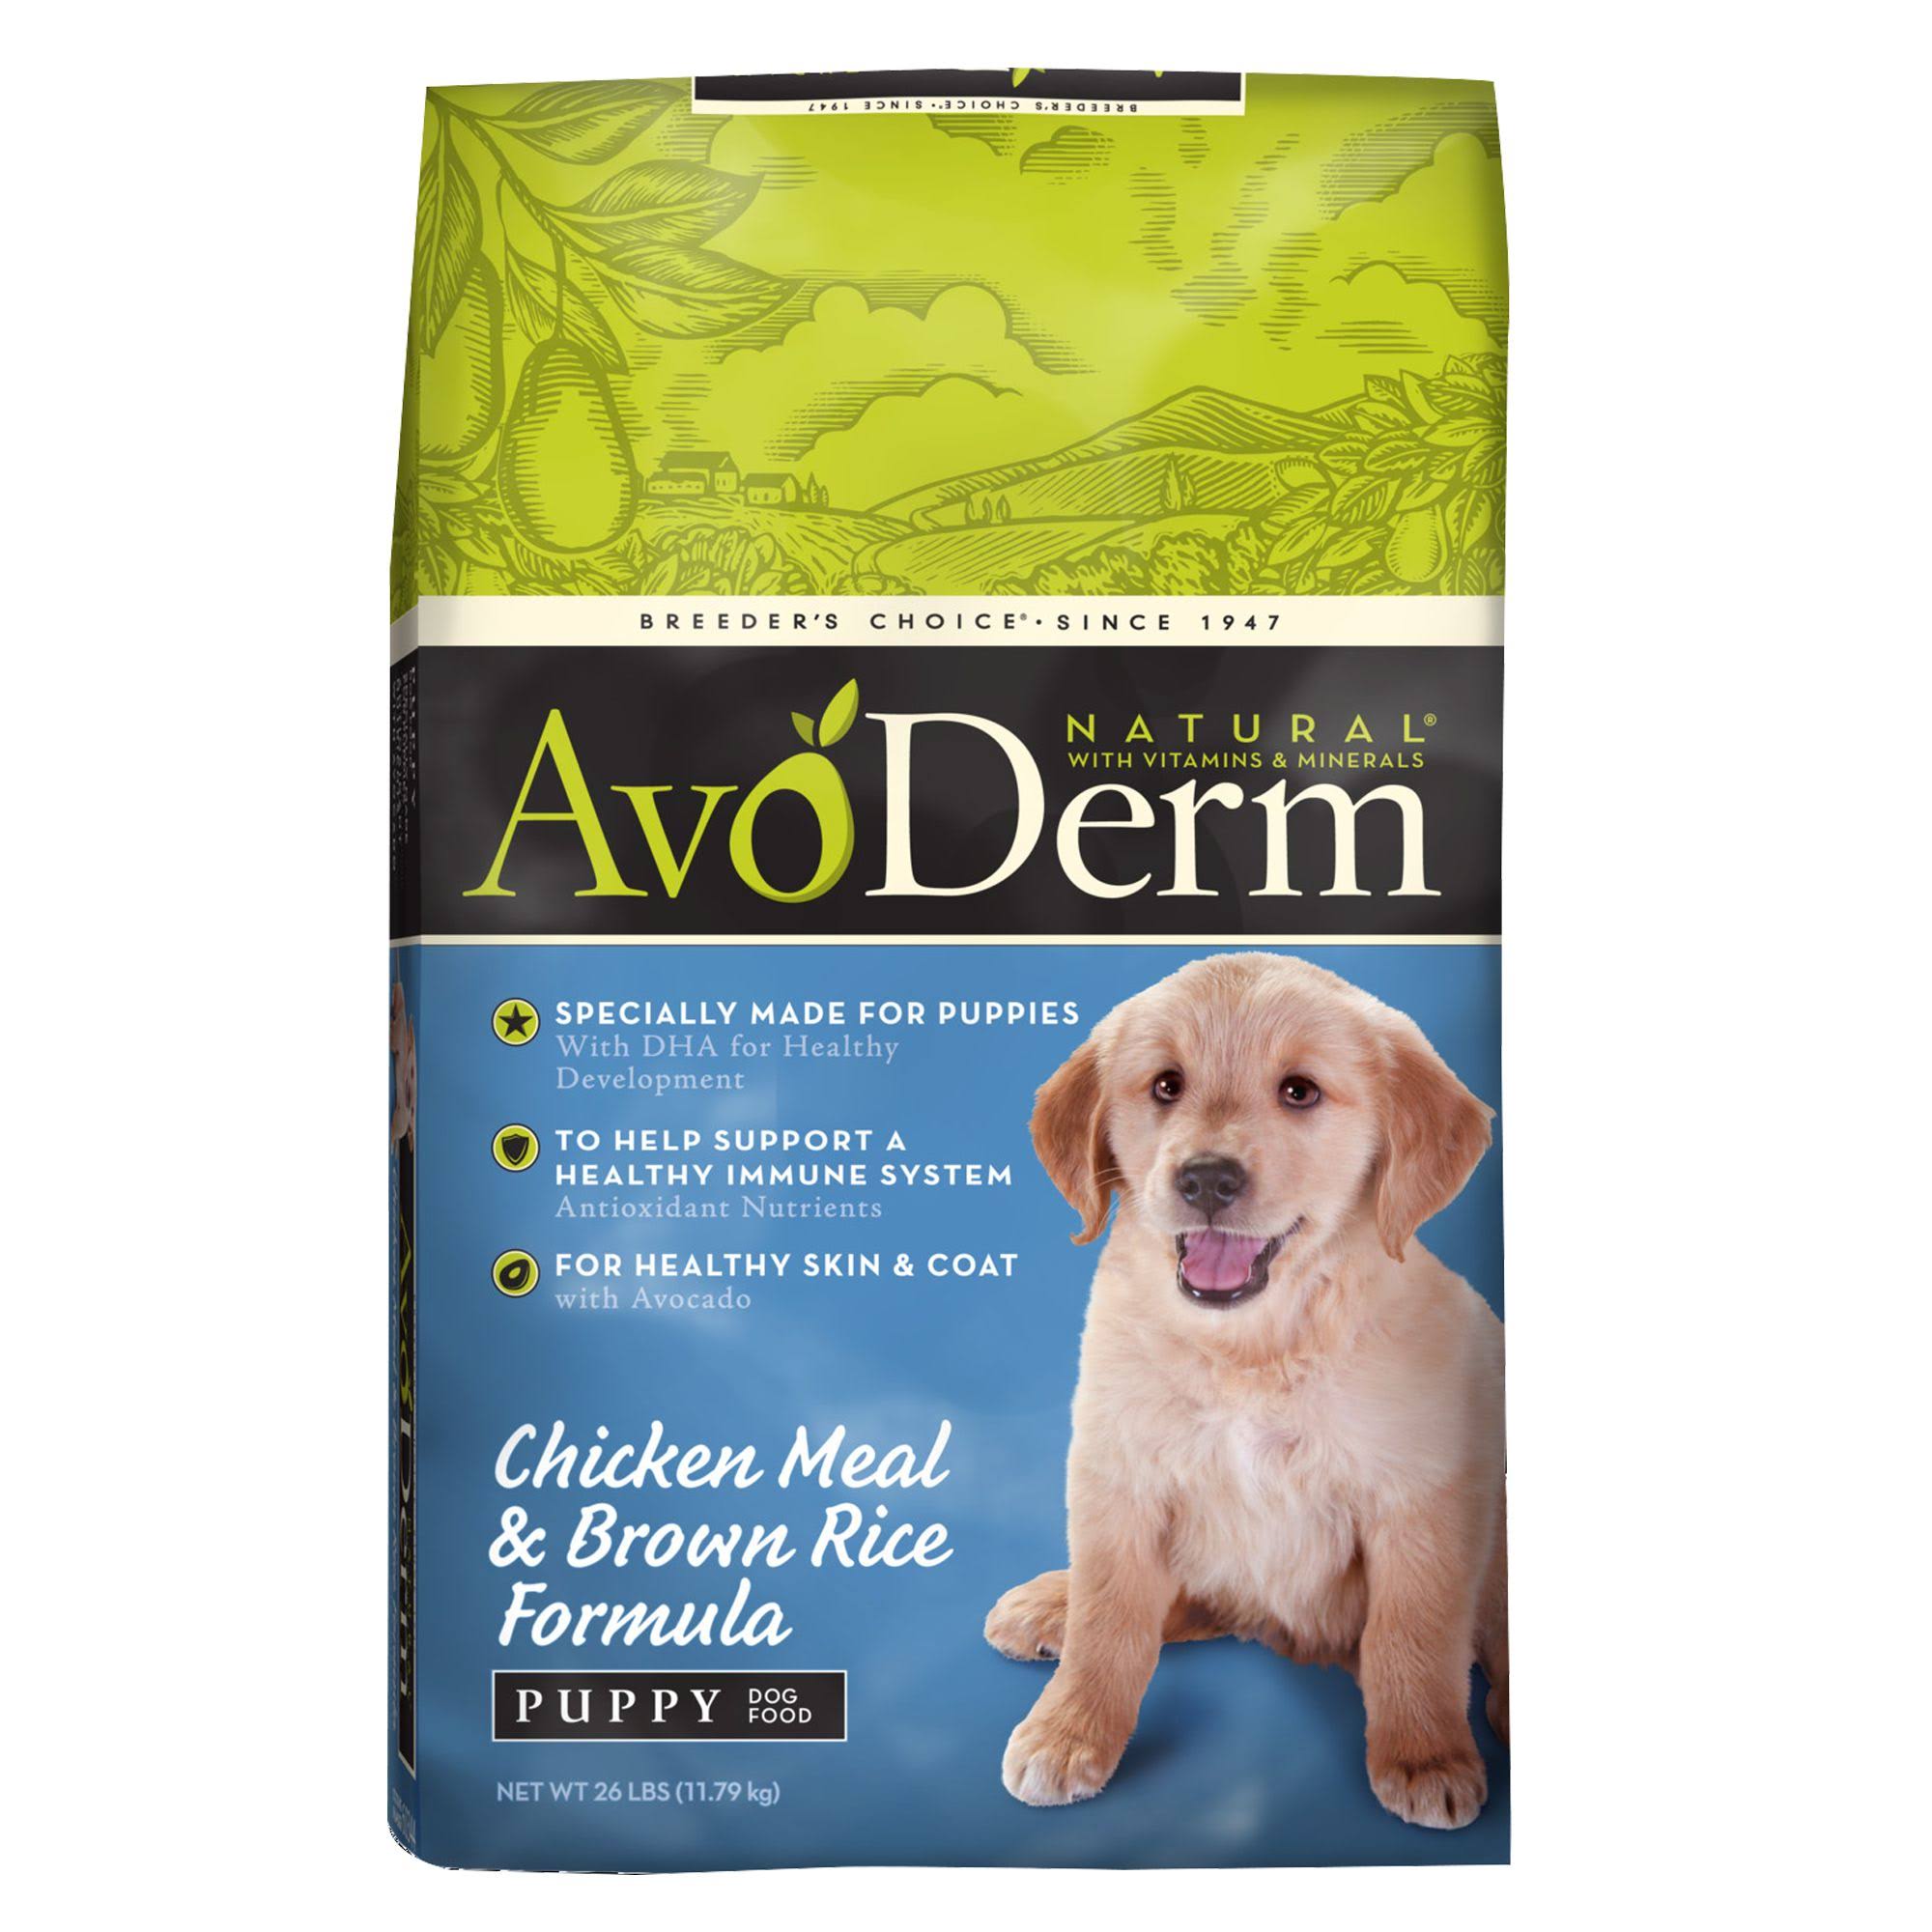 Avoderm Natural Formula Puppy Food - Chicken Meal and Brown Rice, 26lbs